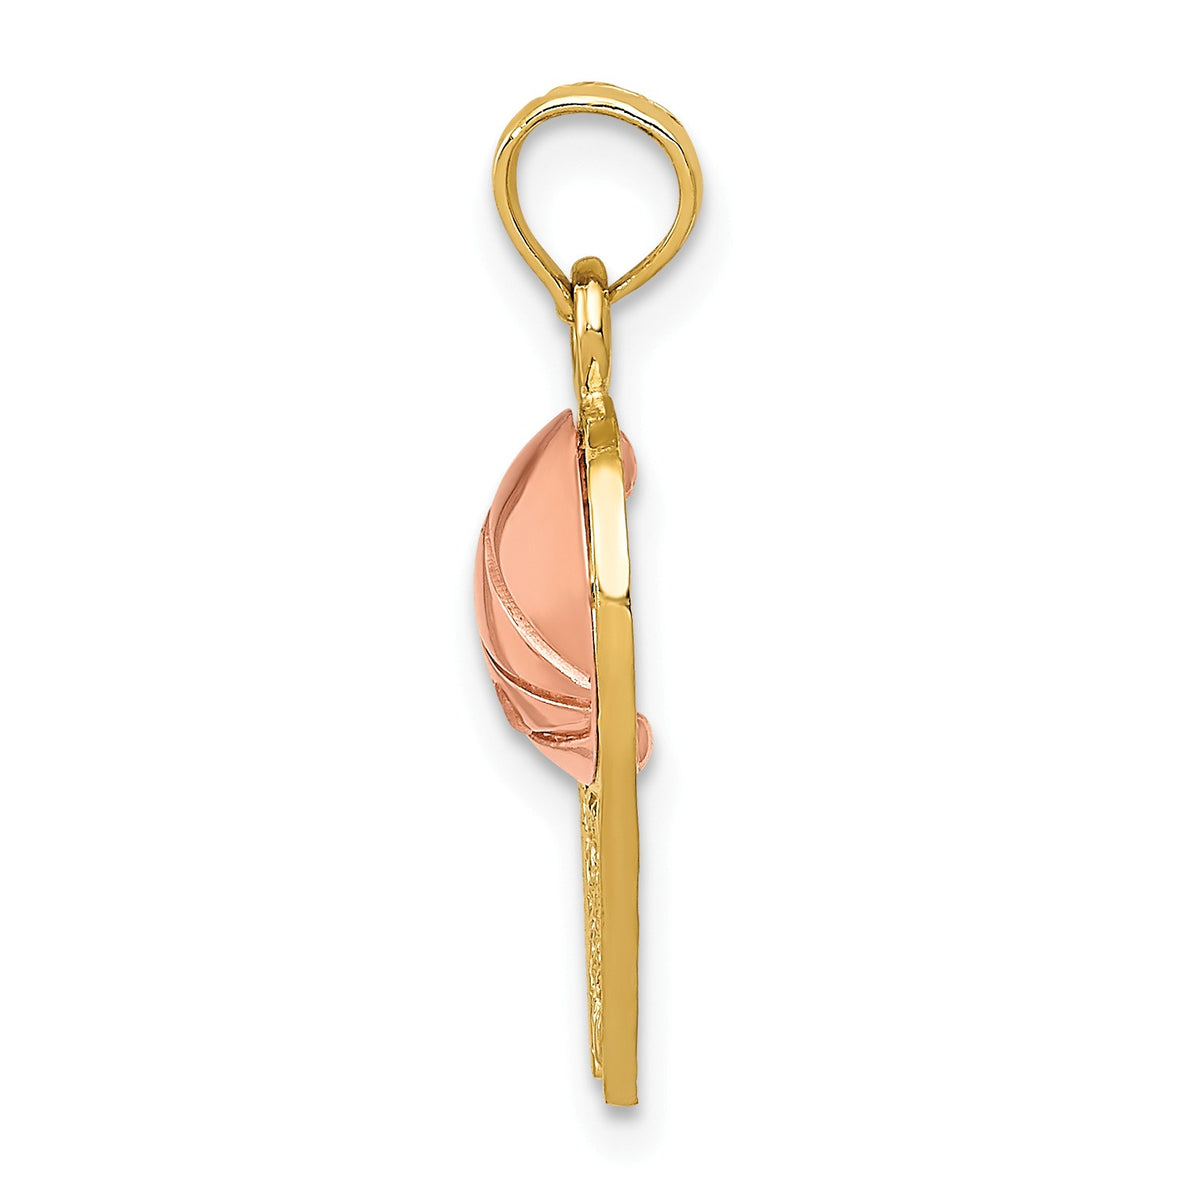 Alternate view of the 14k Yellow and Rose Gold Basketball Hoop and Ball Pendant by The Black Bow Jewelry Co.